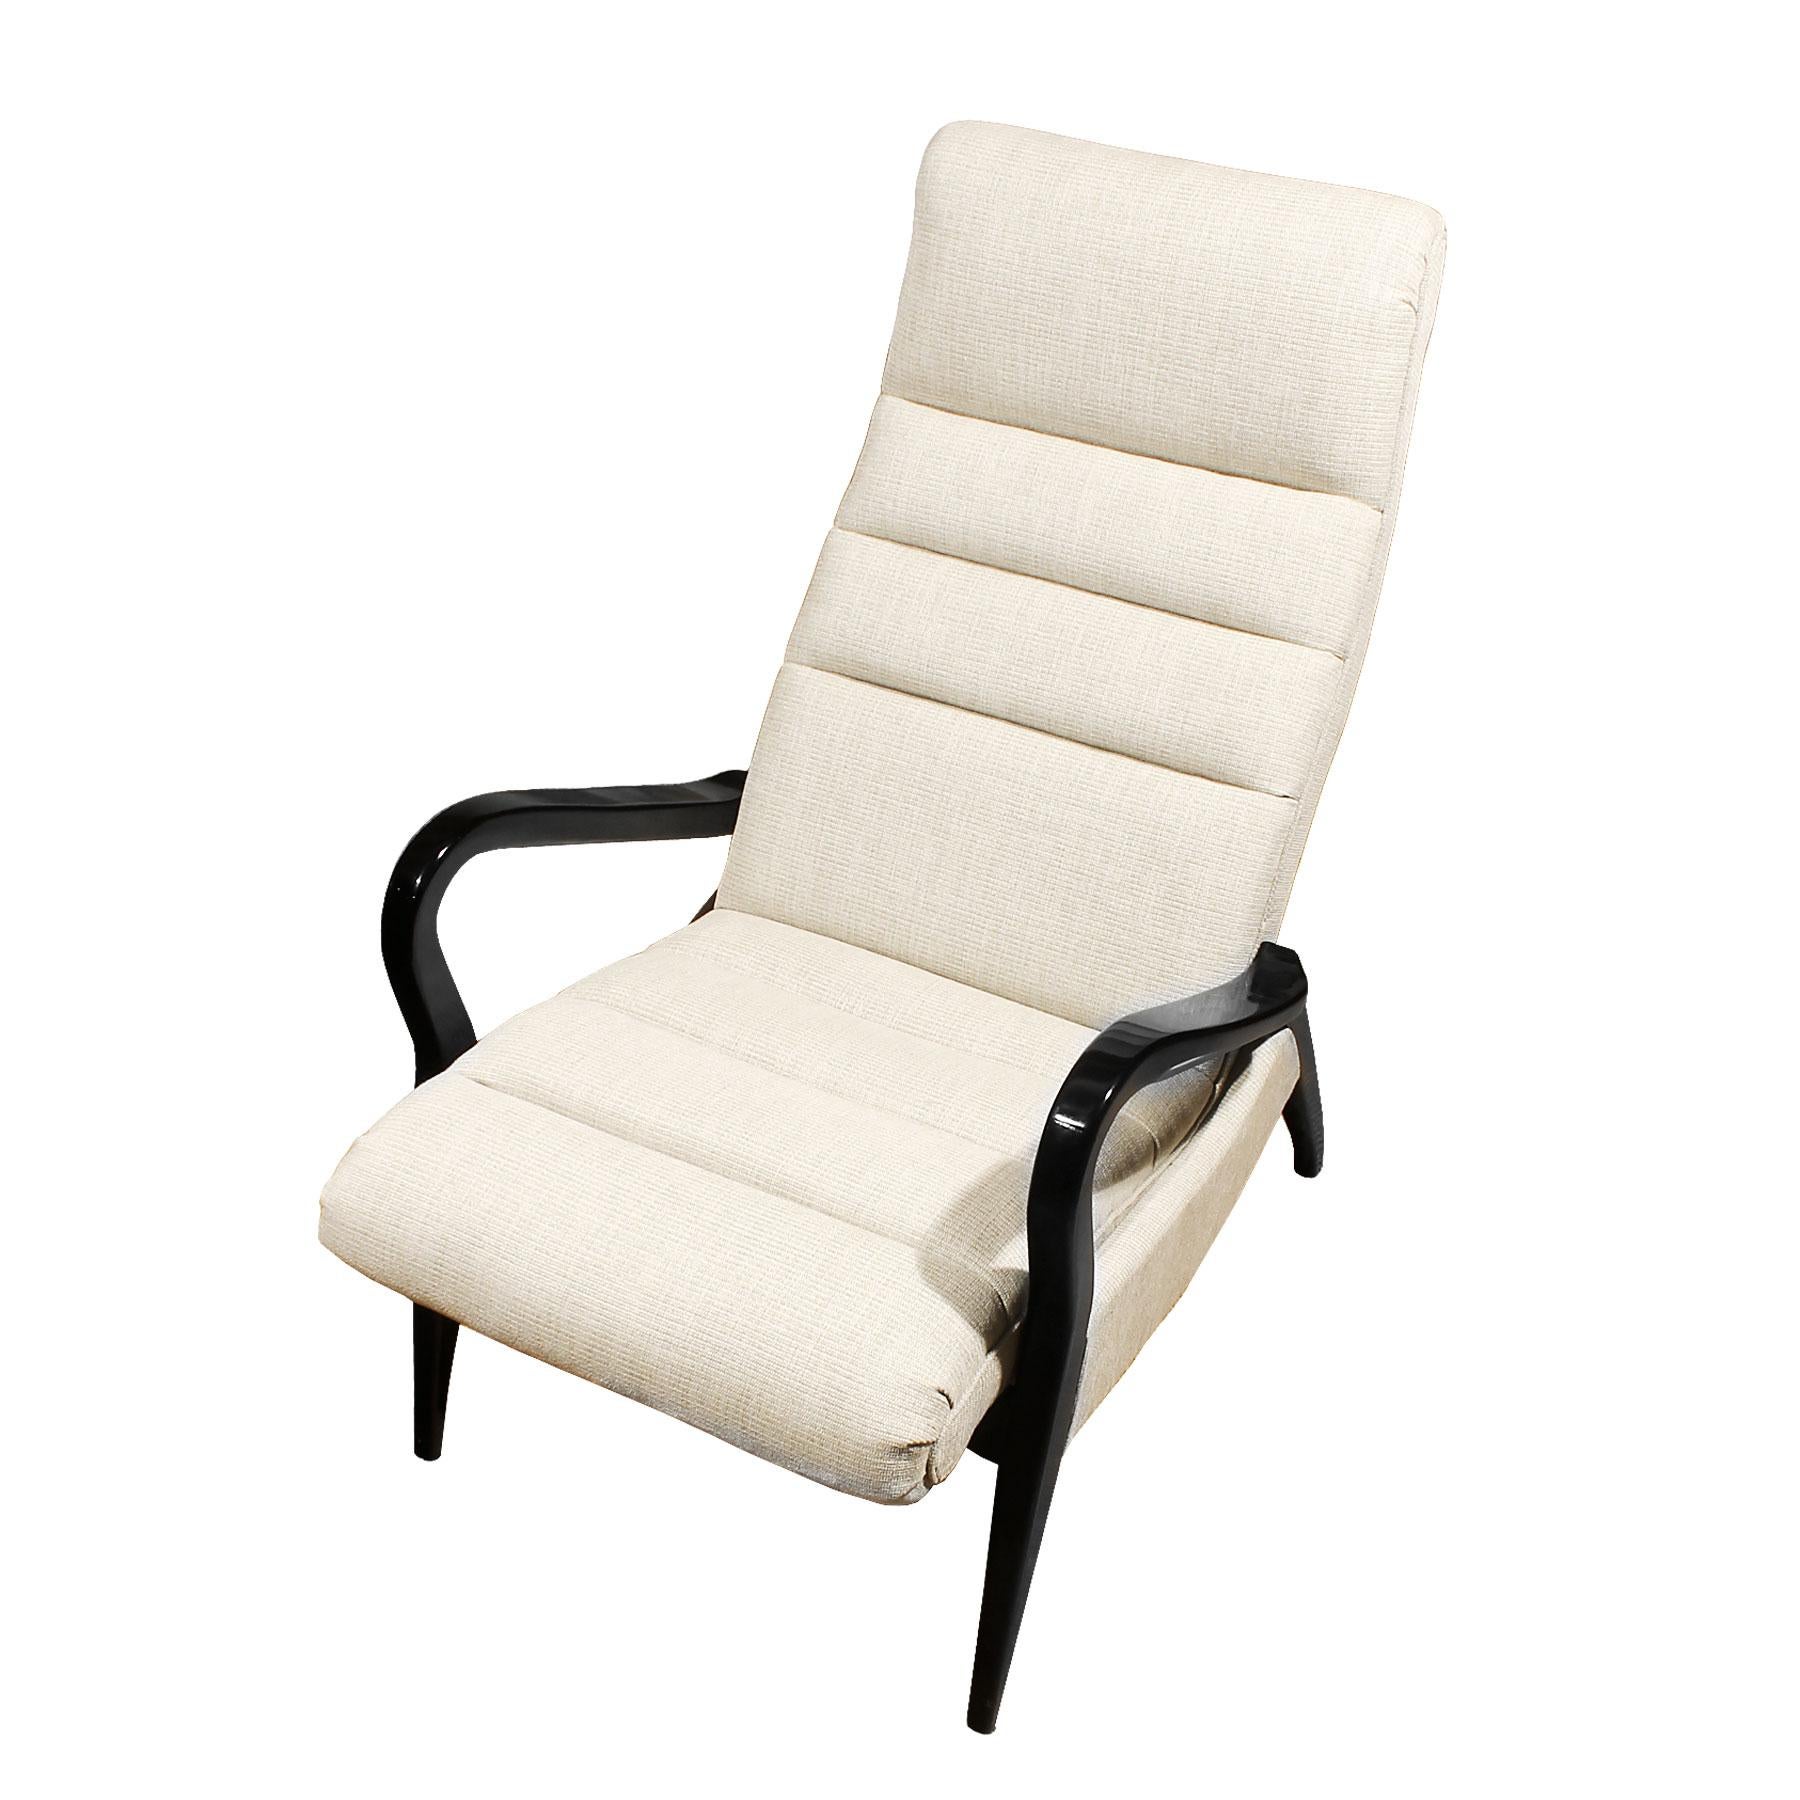 Mid-20th Century Mid-Century Modern Zoomorphic Armchair, Inclination System, Beige Fabric- France For Sale